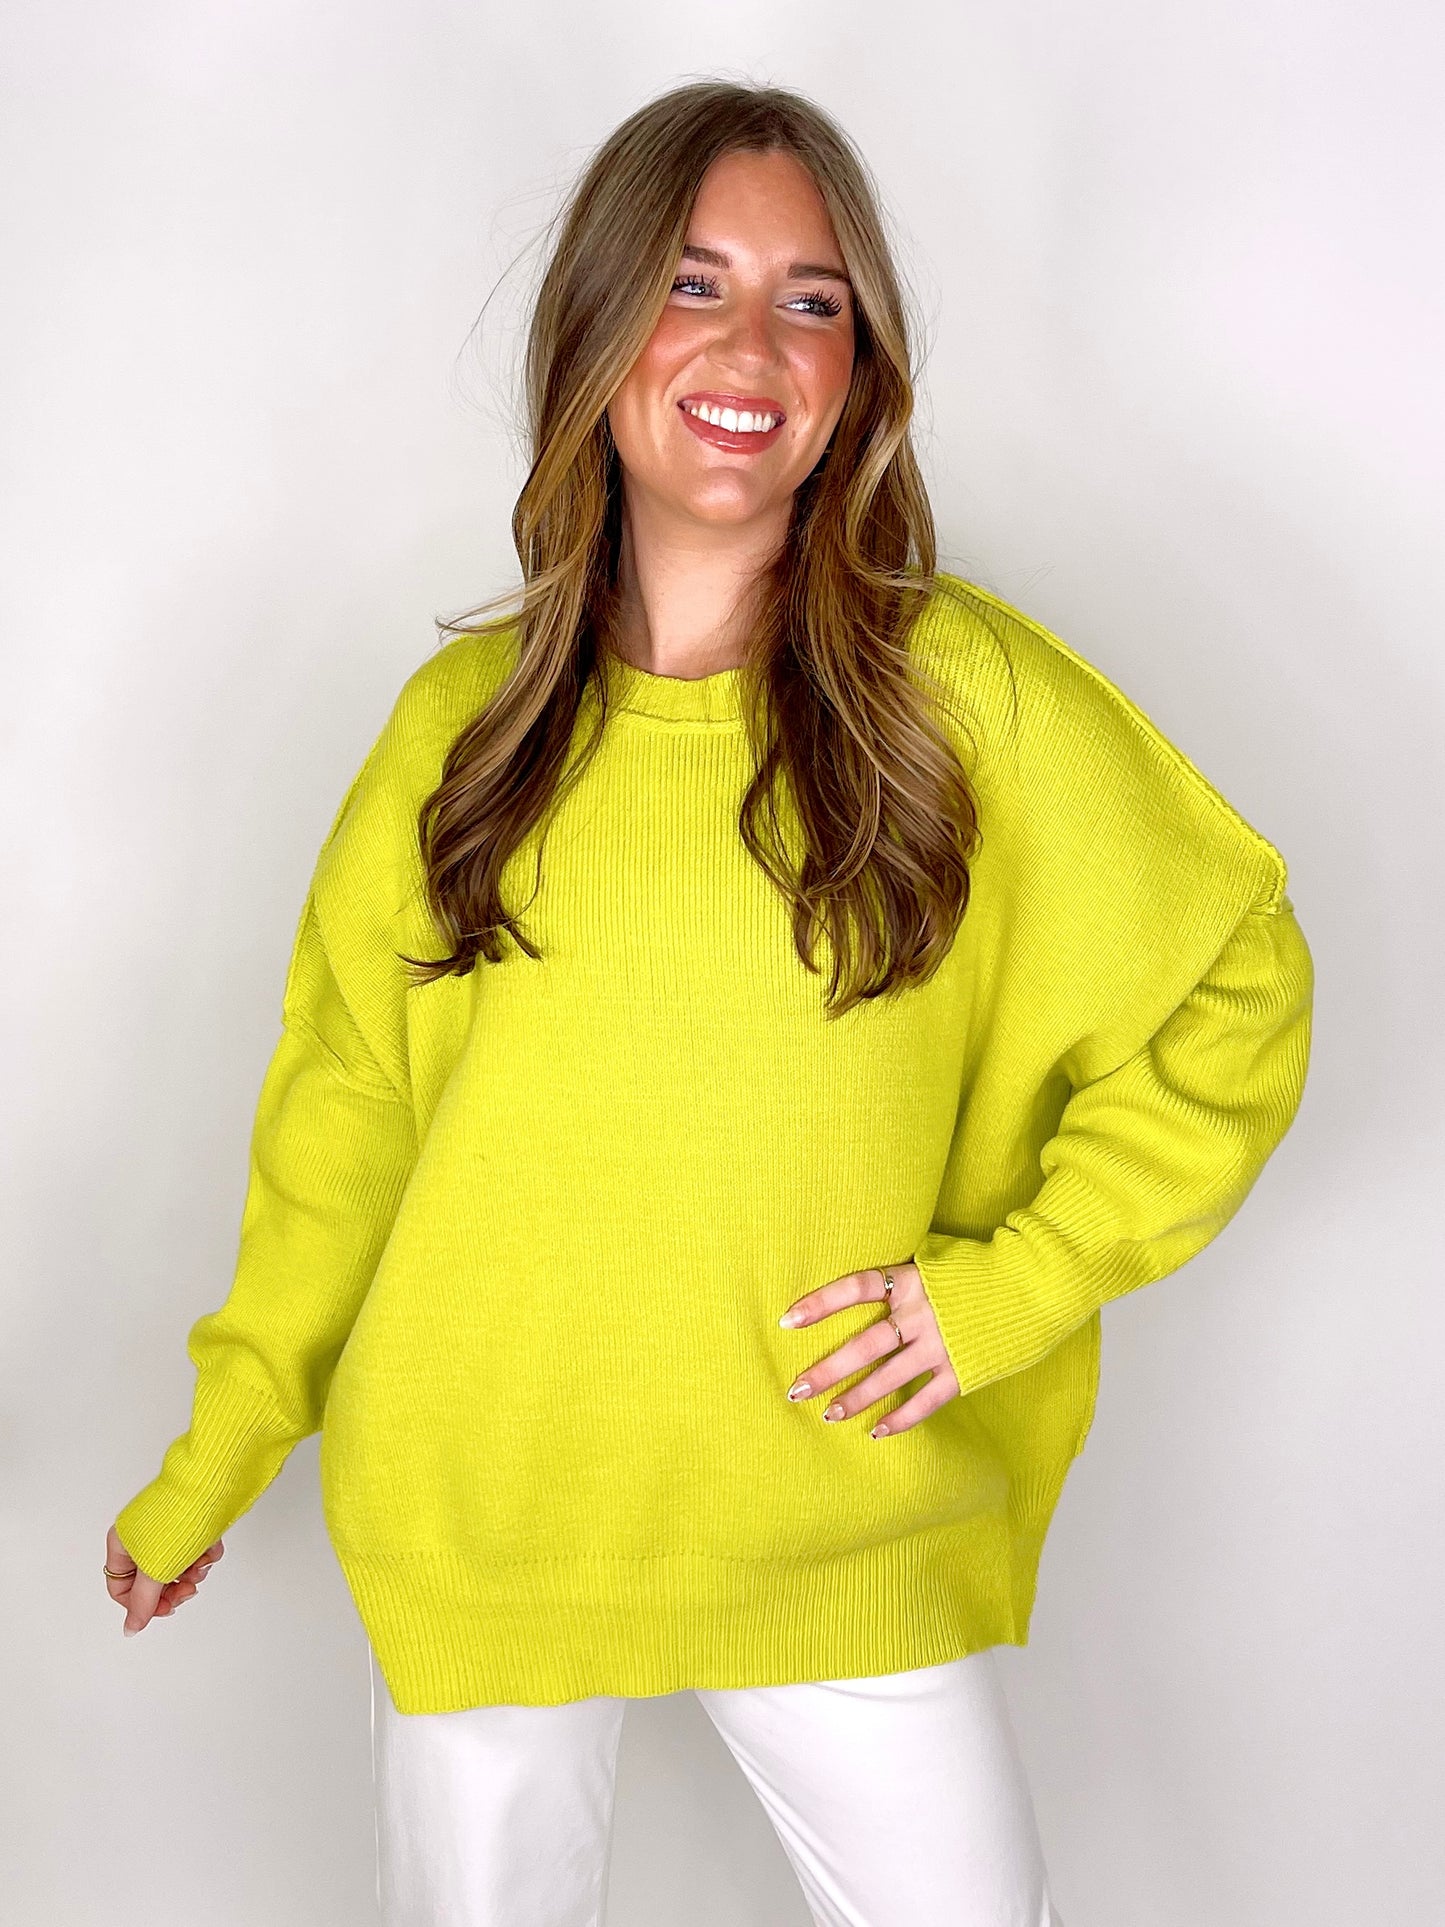 The Avery Sweater-Sweaters-Entro-The Village Shoppe, Women’s Fashion Boutique, Shop Online and In Store - Located in Muscle Shoals, AL.